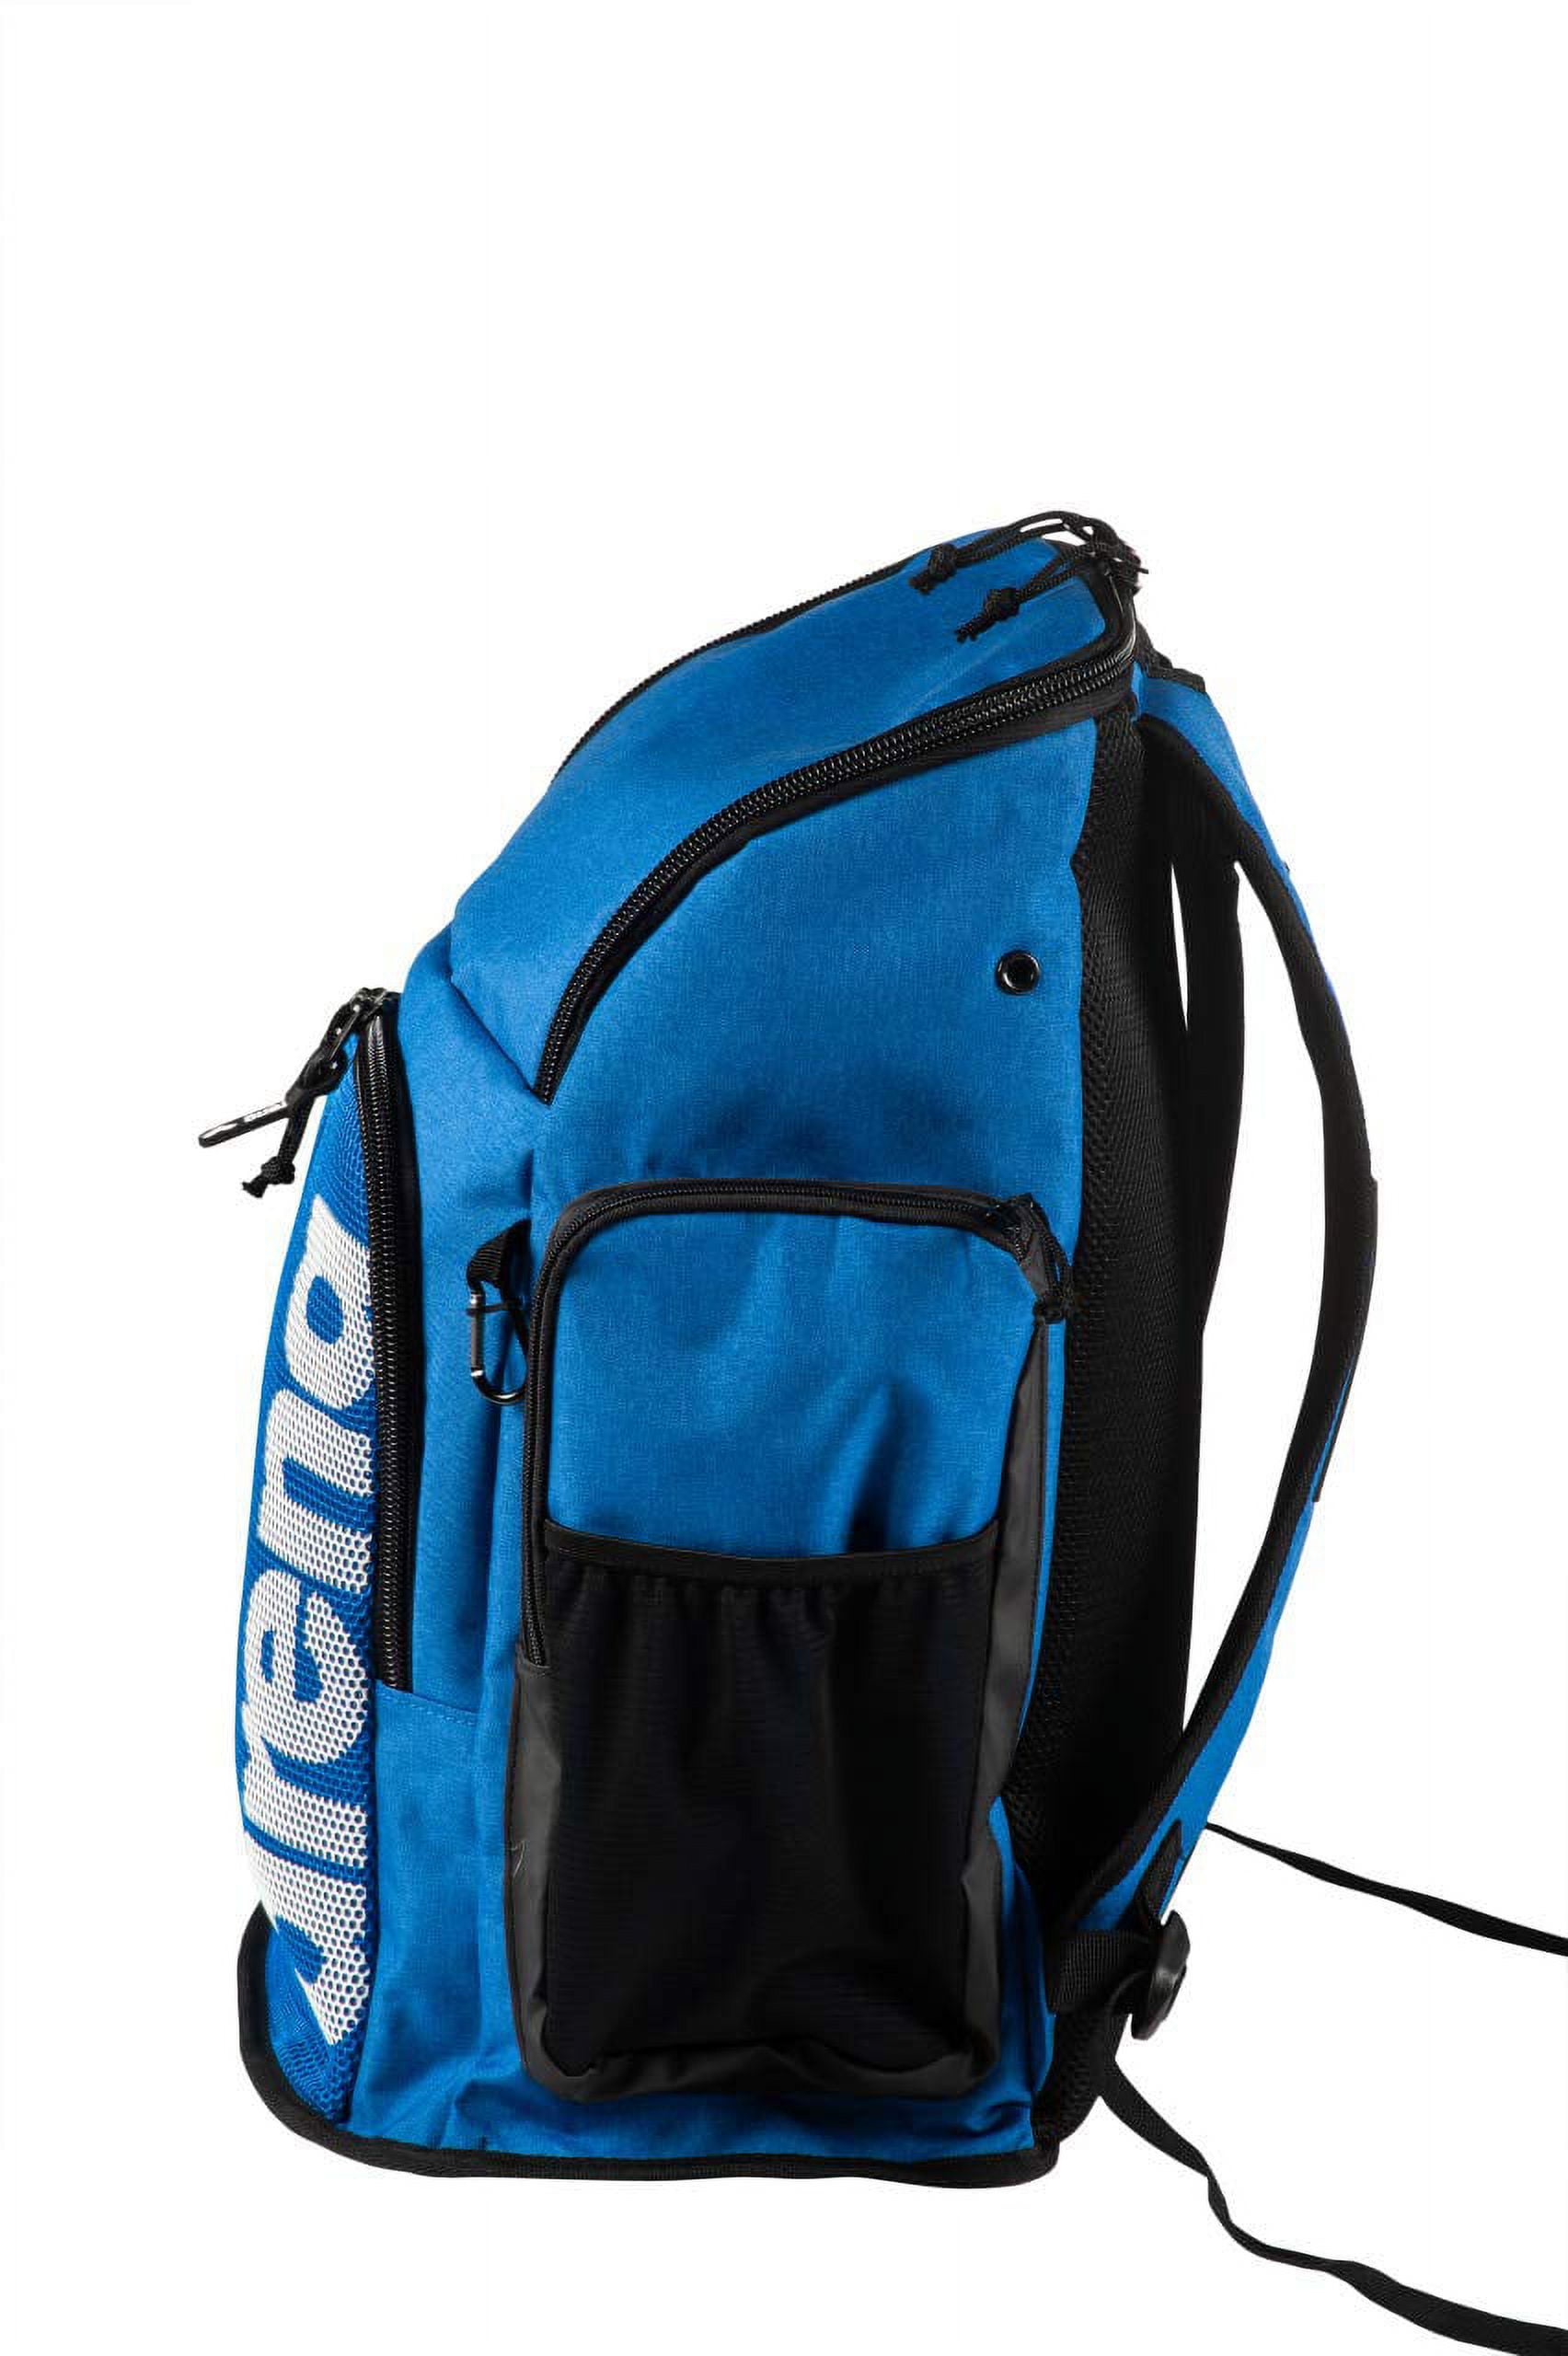 OG TEAM BACKPACK 45 White/turquoise - ARENA - EQUIPEMENT & LIBRAIRIE